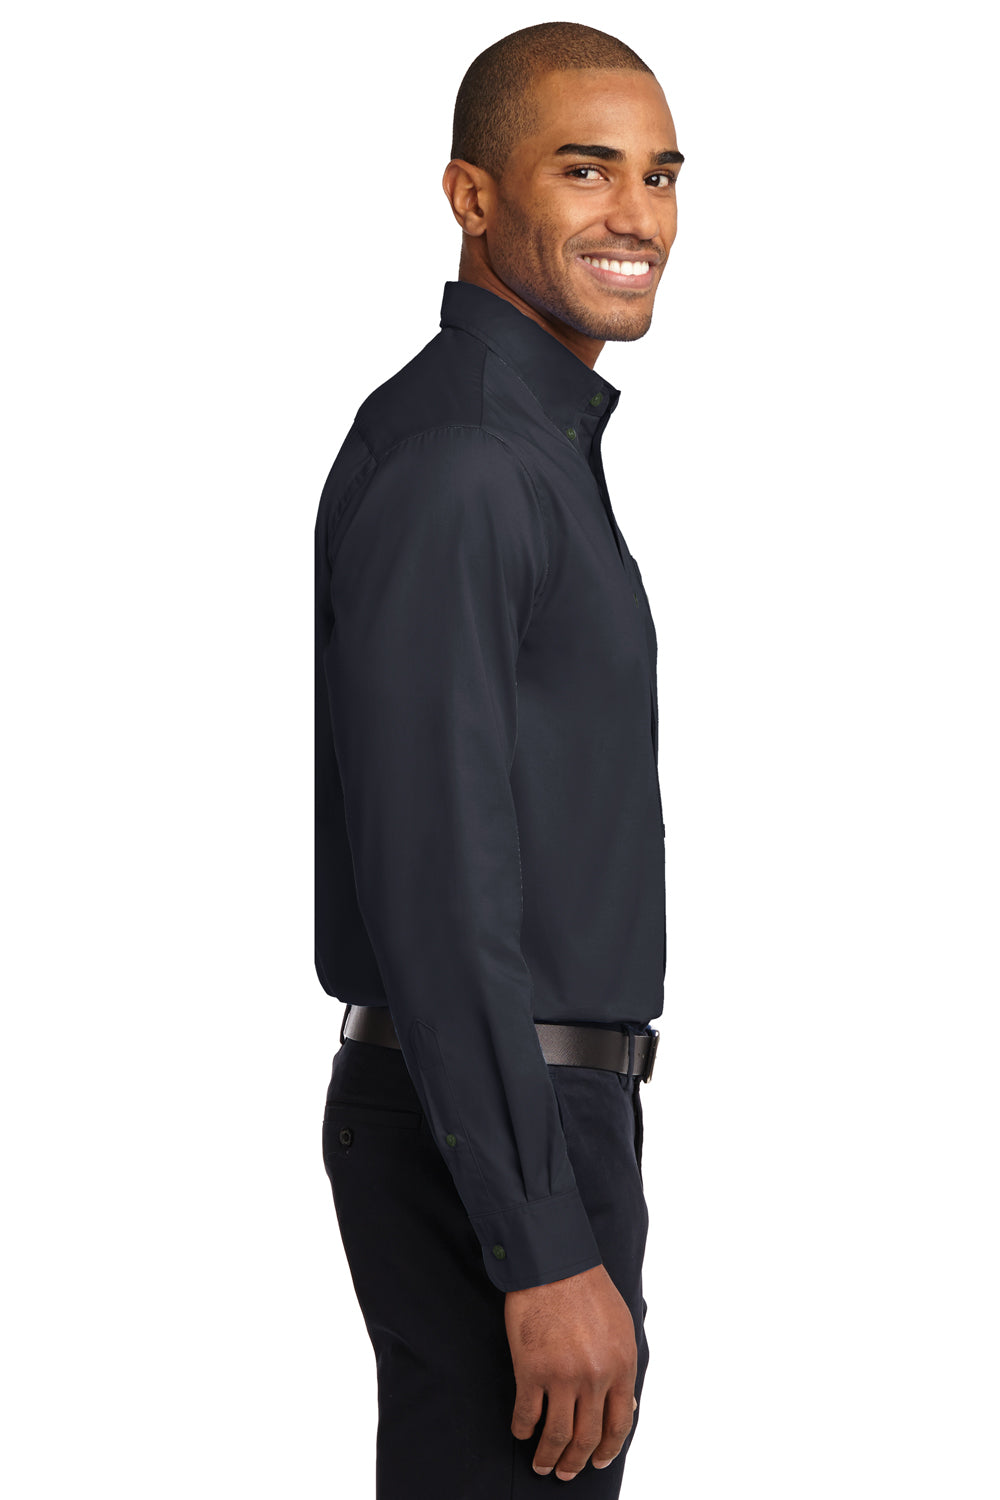 Port Authority S608/TLS608/S608ES Mens Easy Care Wrinkle Resistant Long Sleeve Button Down Shirt w/ Pocket Classic Navy Blue Side